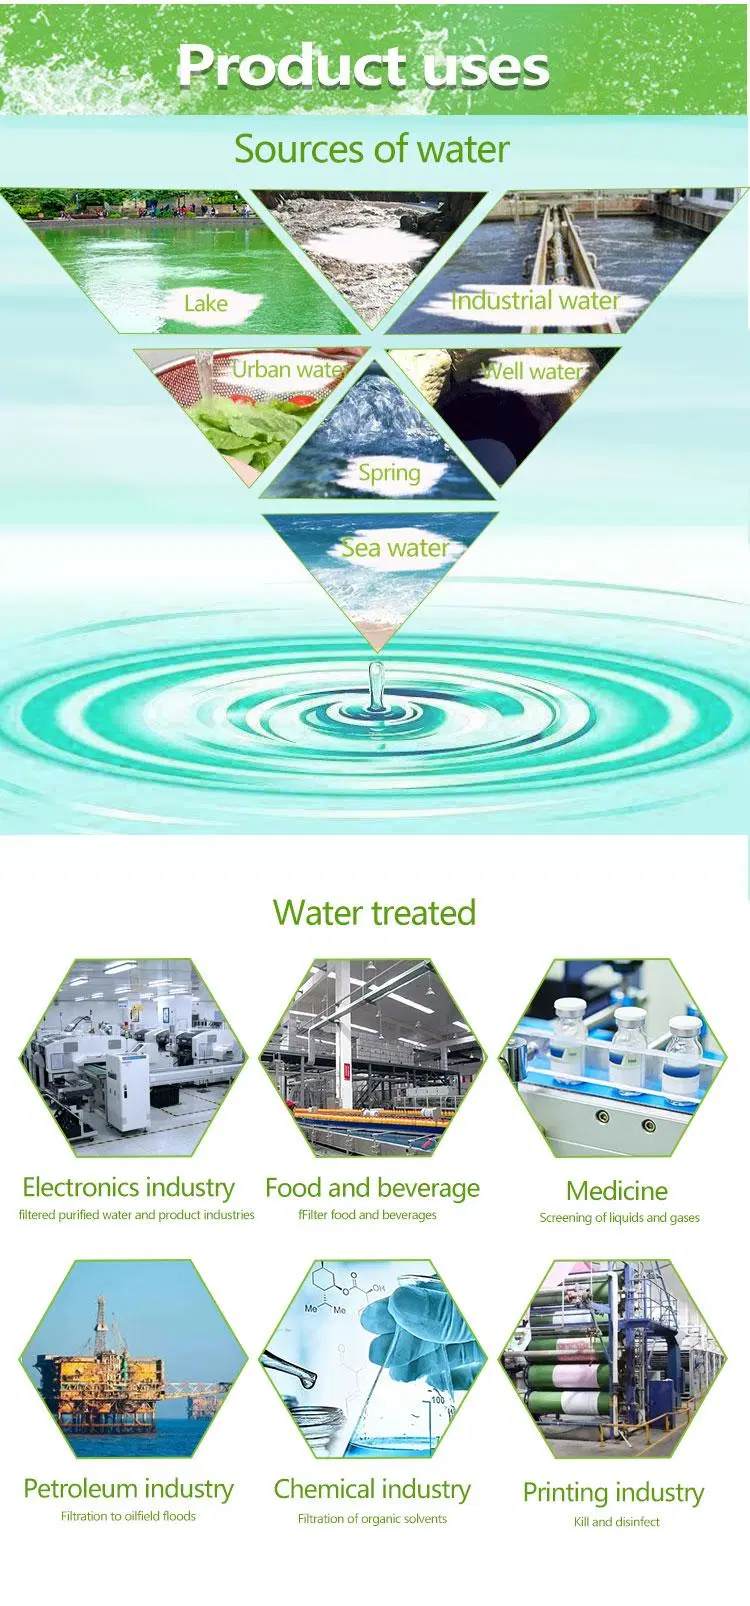 Drinking Water System Large RO Plant Seawater Desalination Seawater Desalination Machine RO